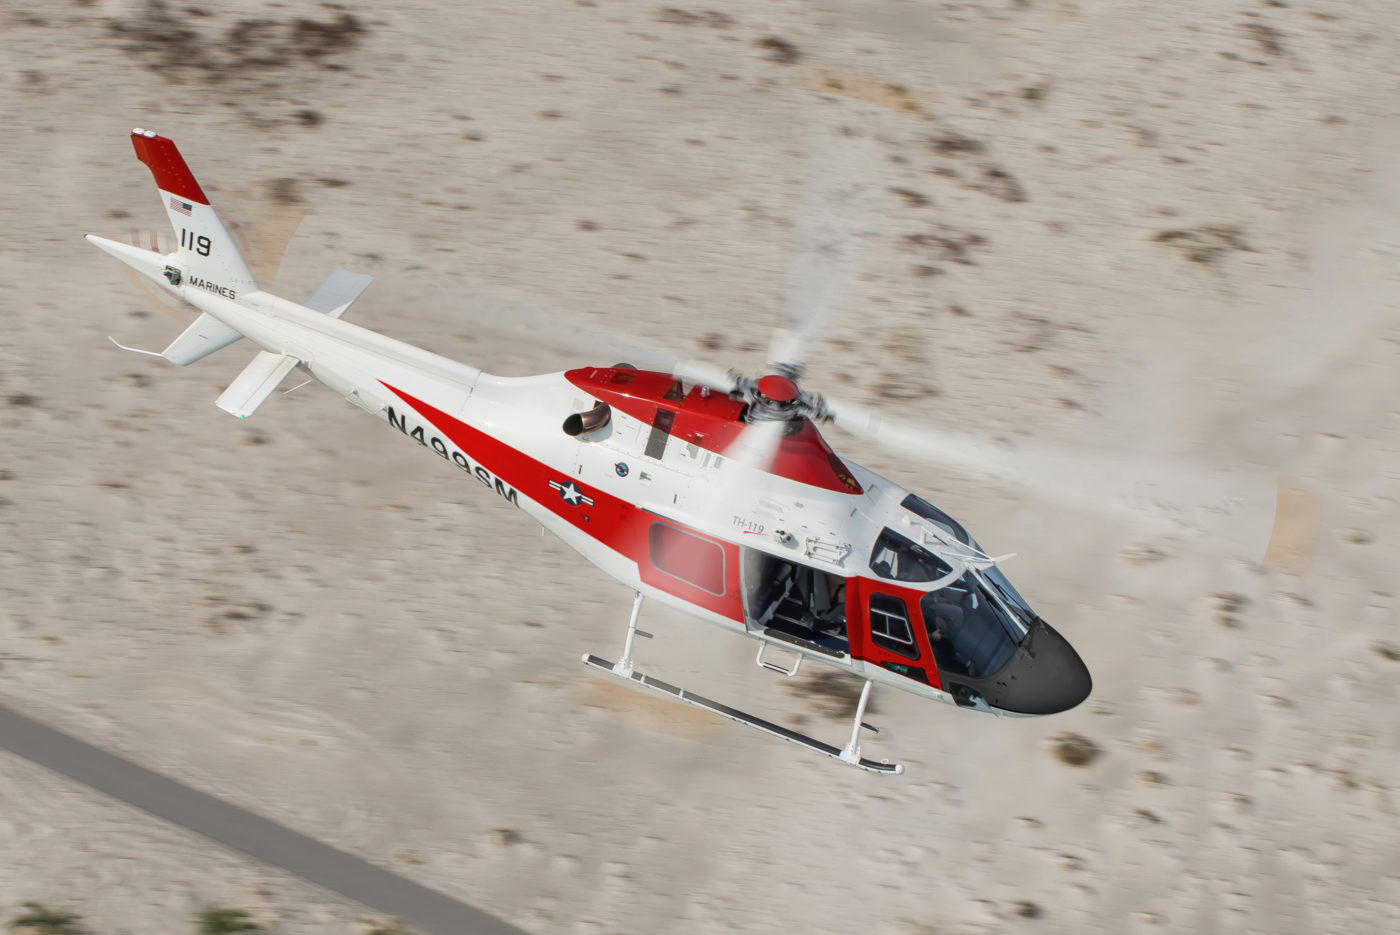 The TH-119 is expected to perform its maiden flight in fall 2018 and to achieve FAA certification in the first quarter of 2019. Leonardo Photo